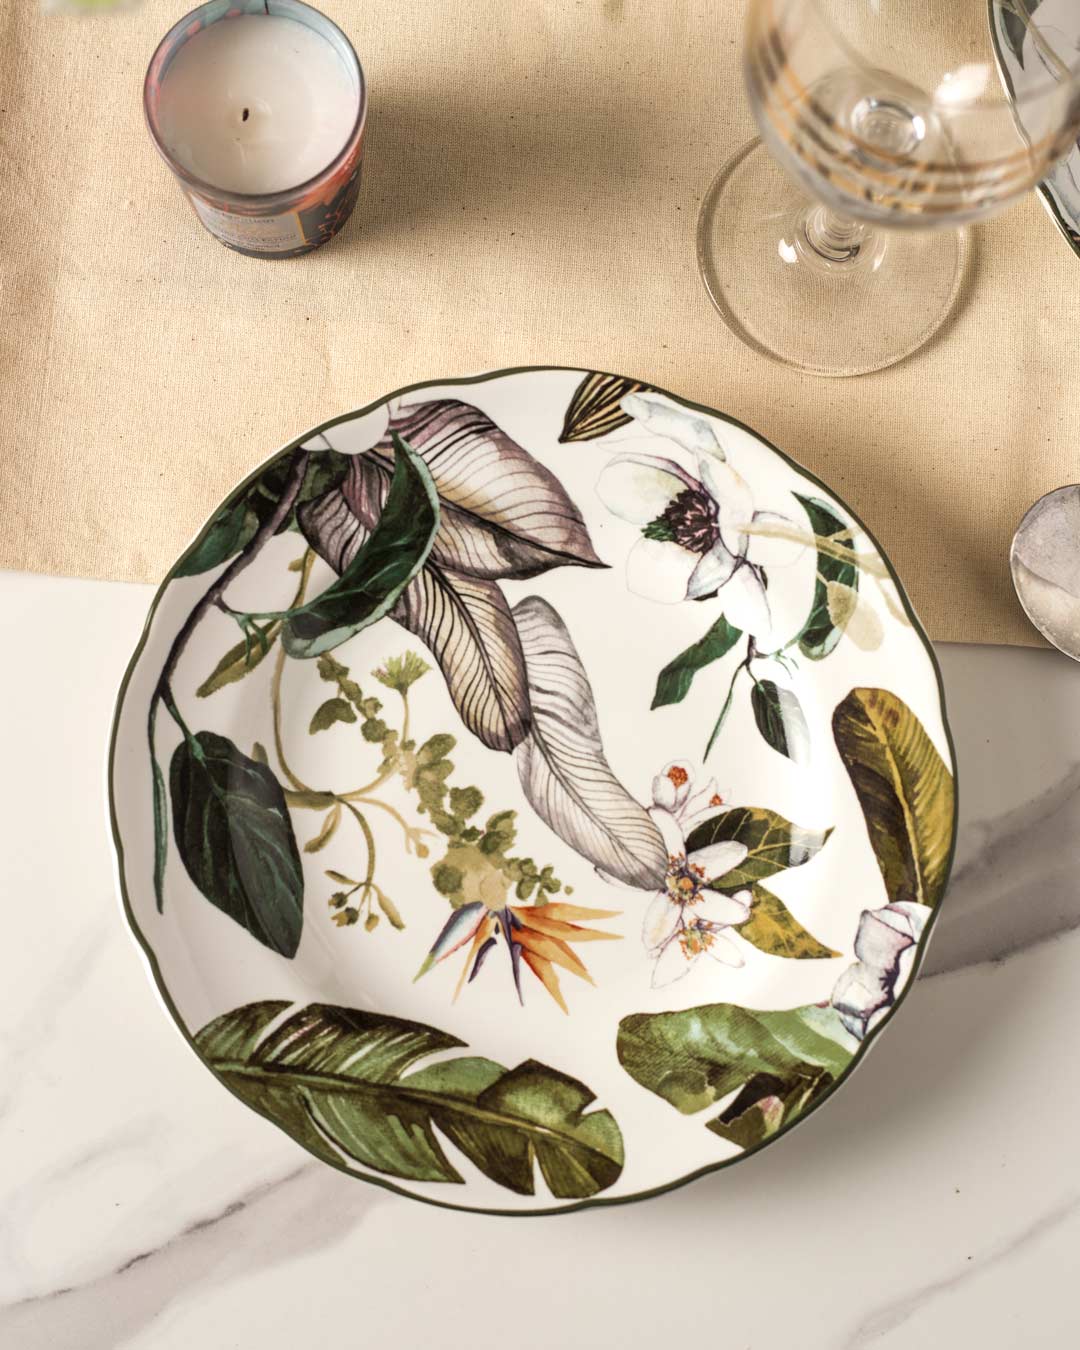 Borneo White Quarter Plate with exotic leaf design displayed on a natural table setting, blending effortlessly with modern home decor.